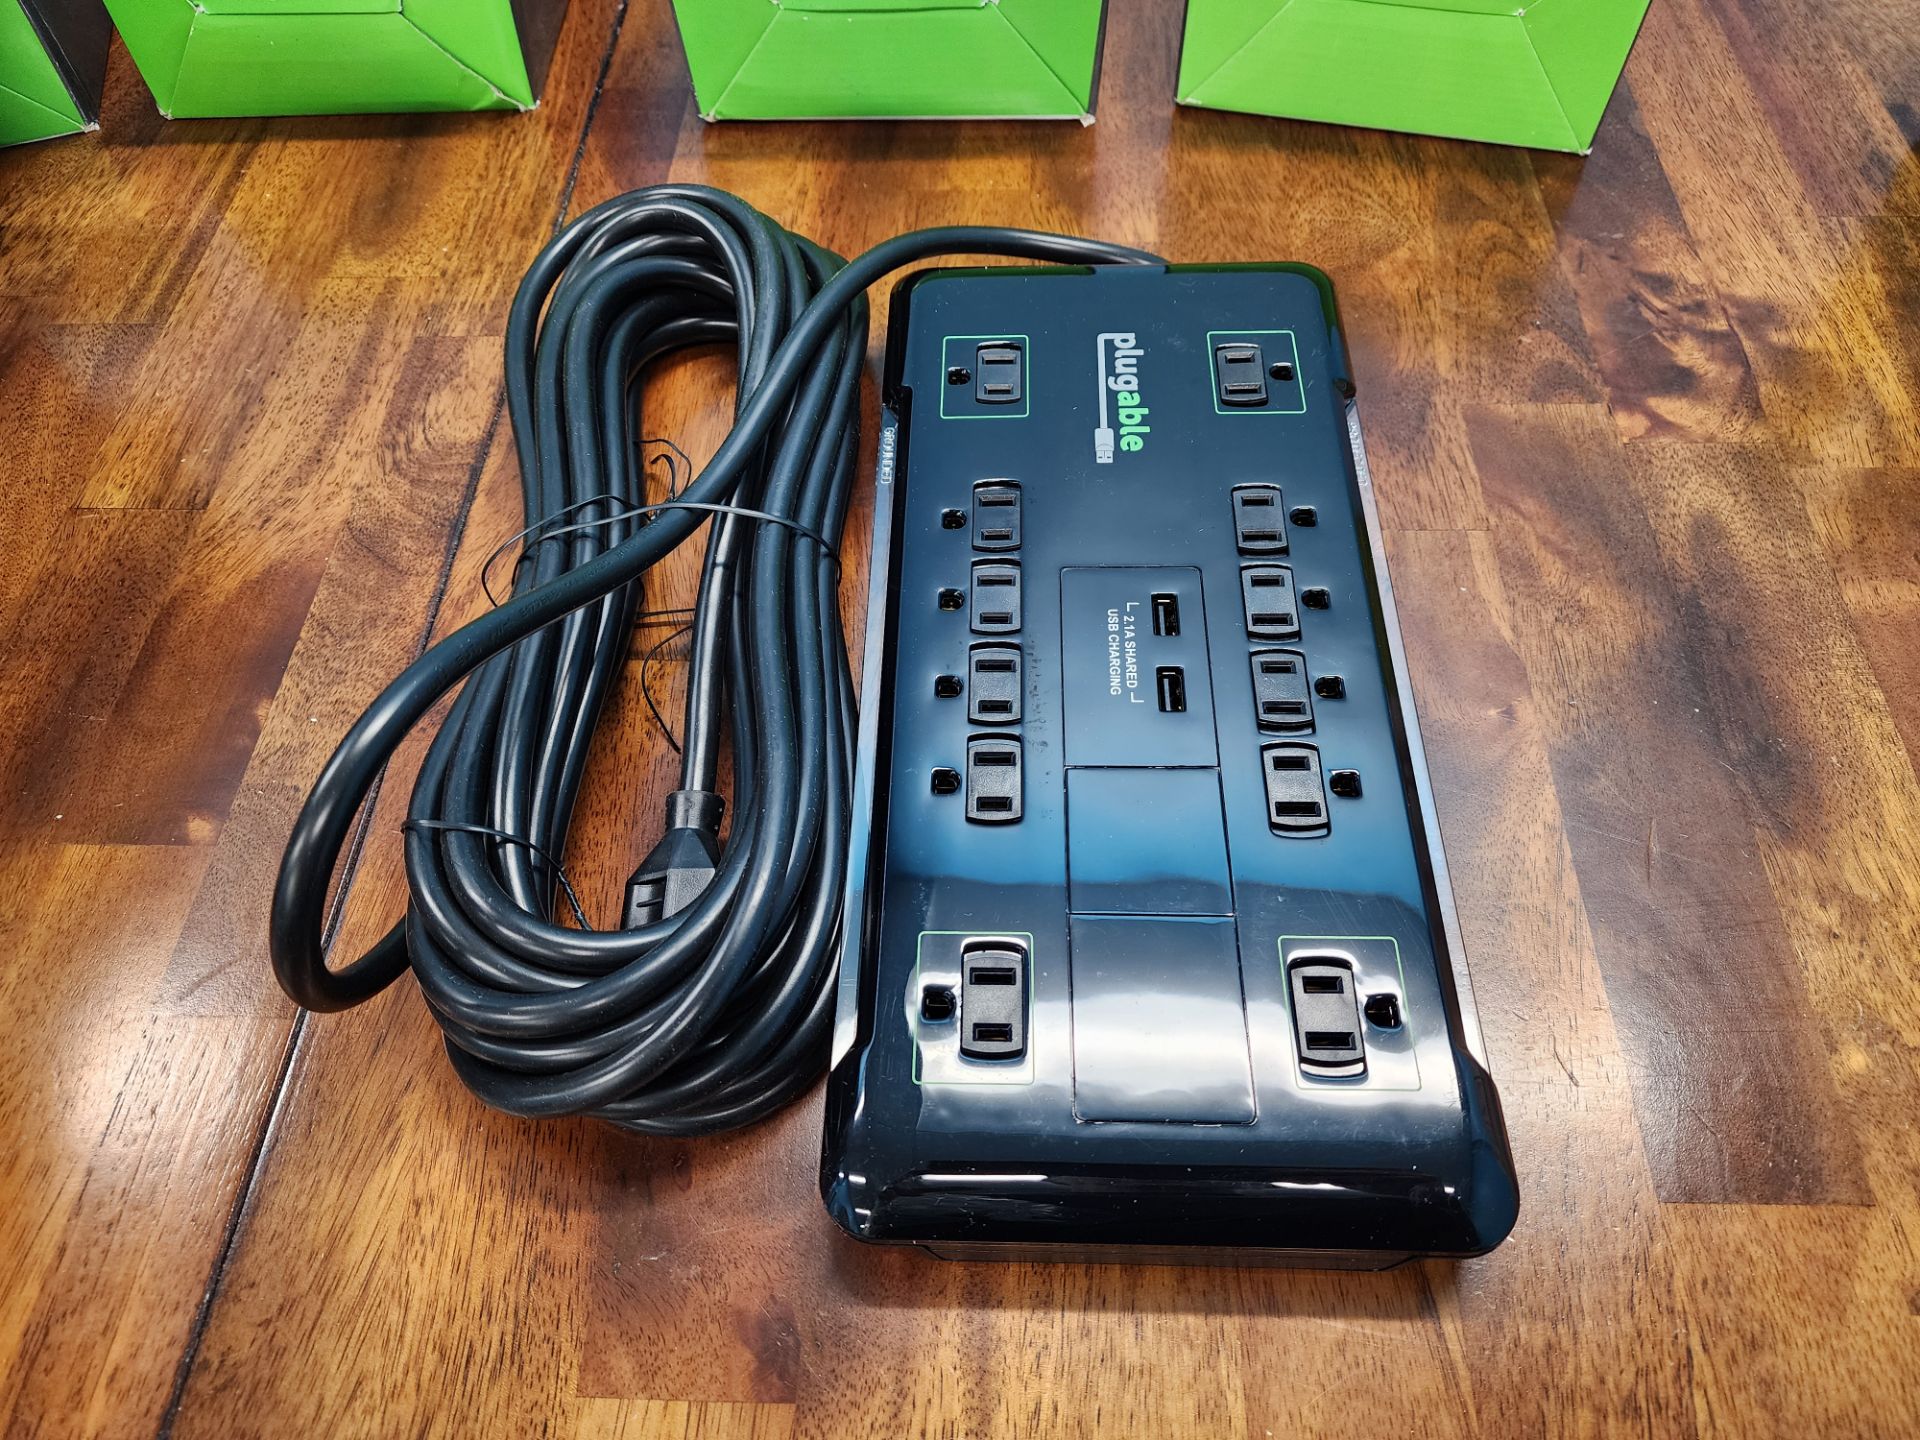 Lot of (6) Plugable 12-Outlet Power Surge Protectors w/Dual USB Charger Ports & 25' Cord - Image 4 of 4